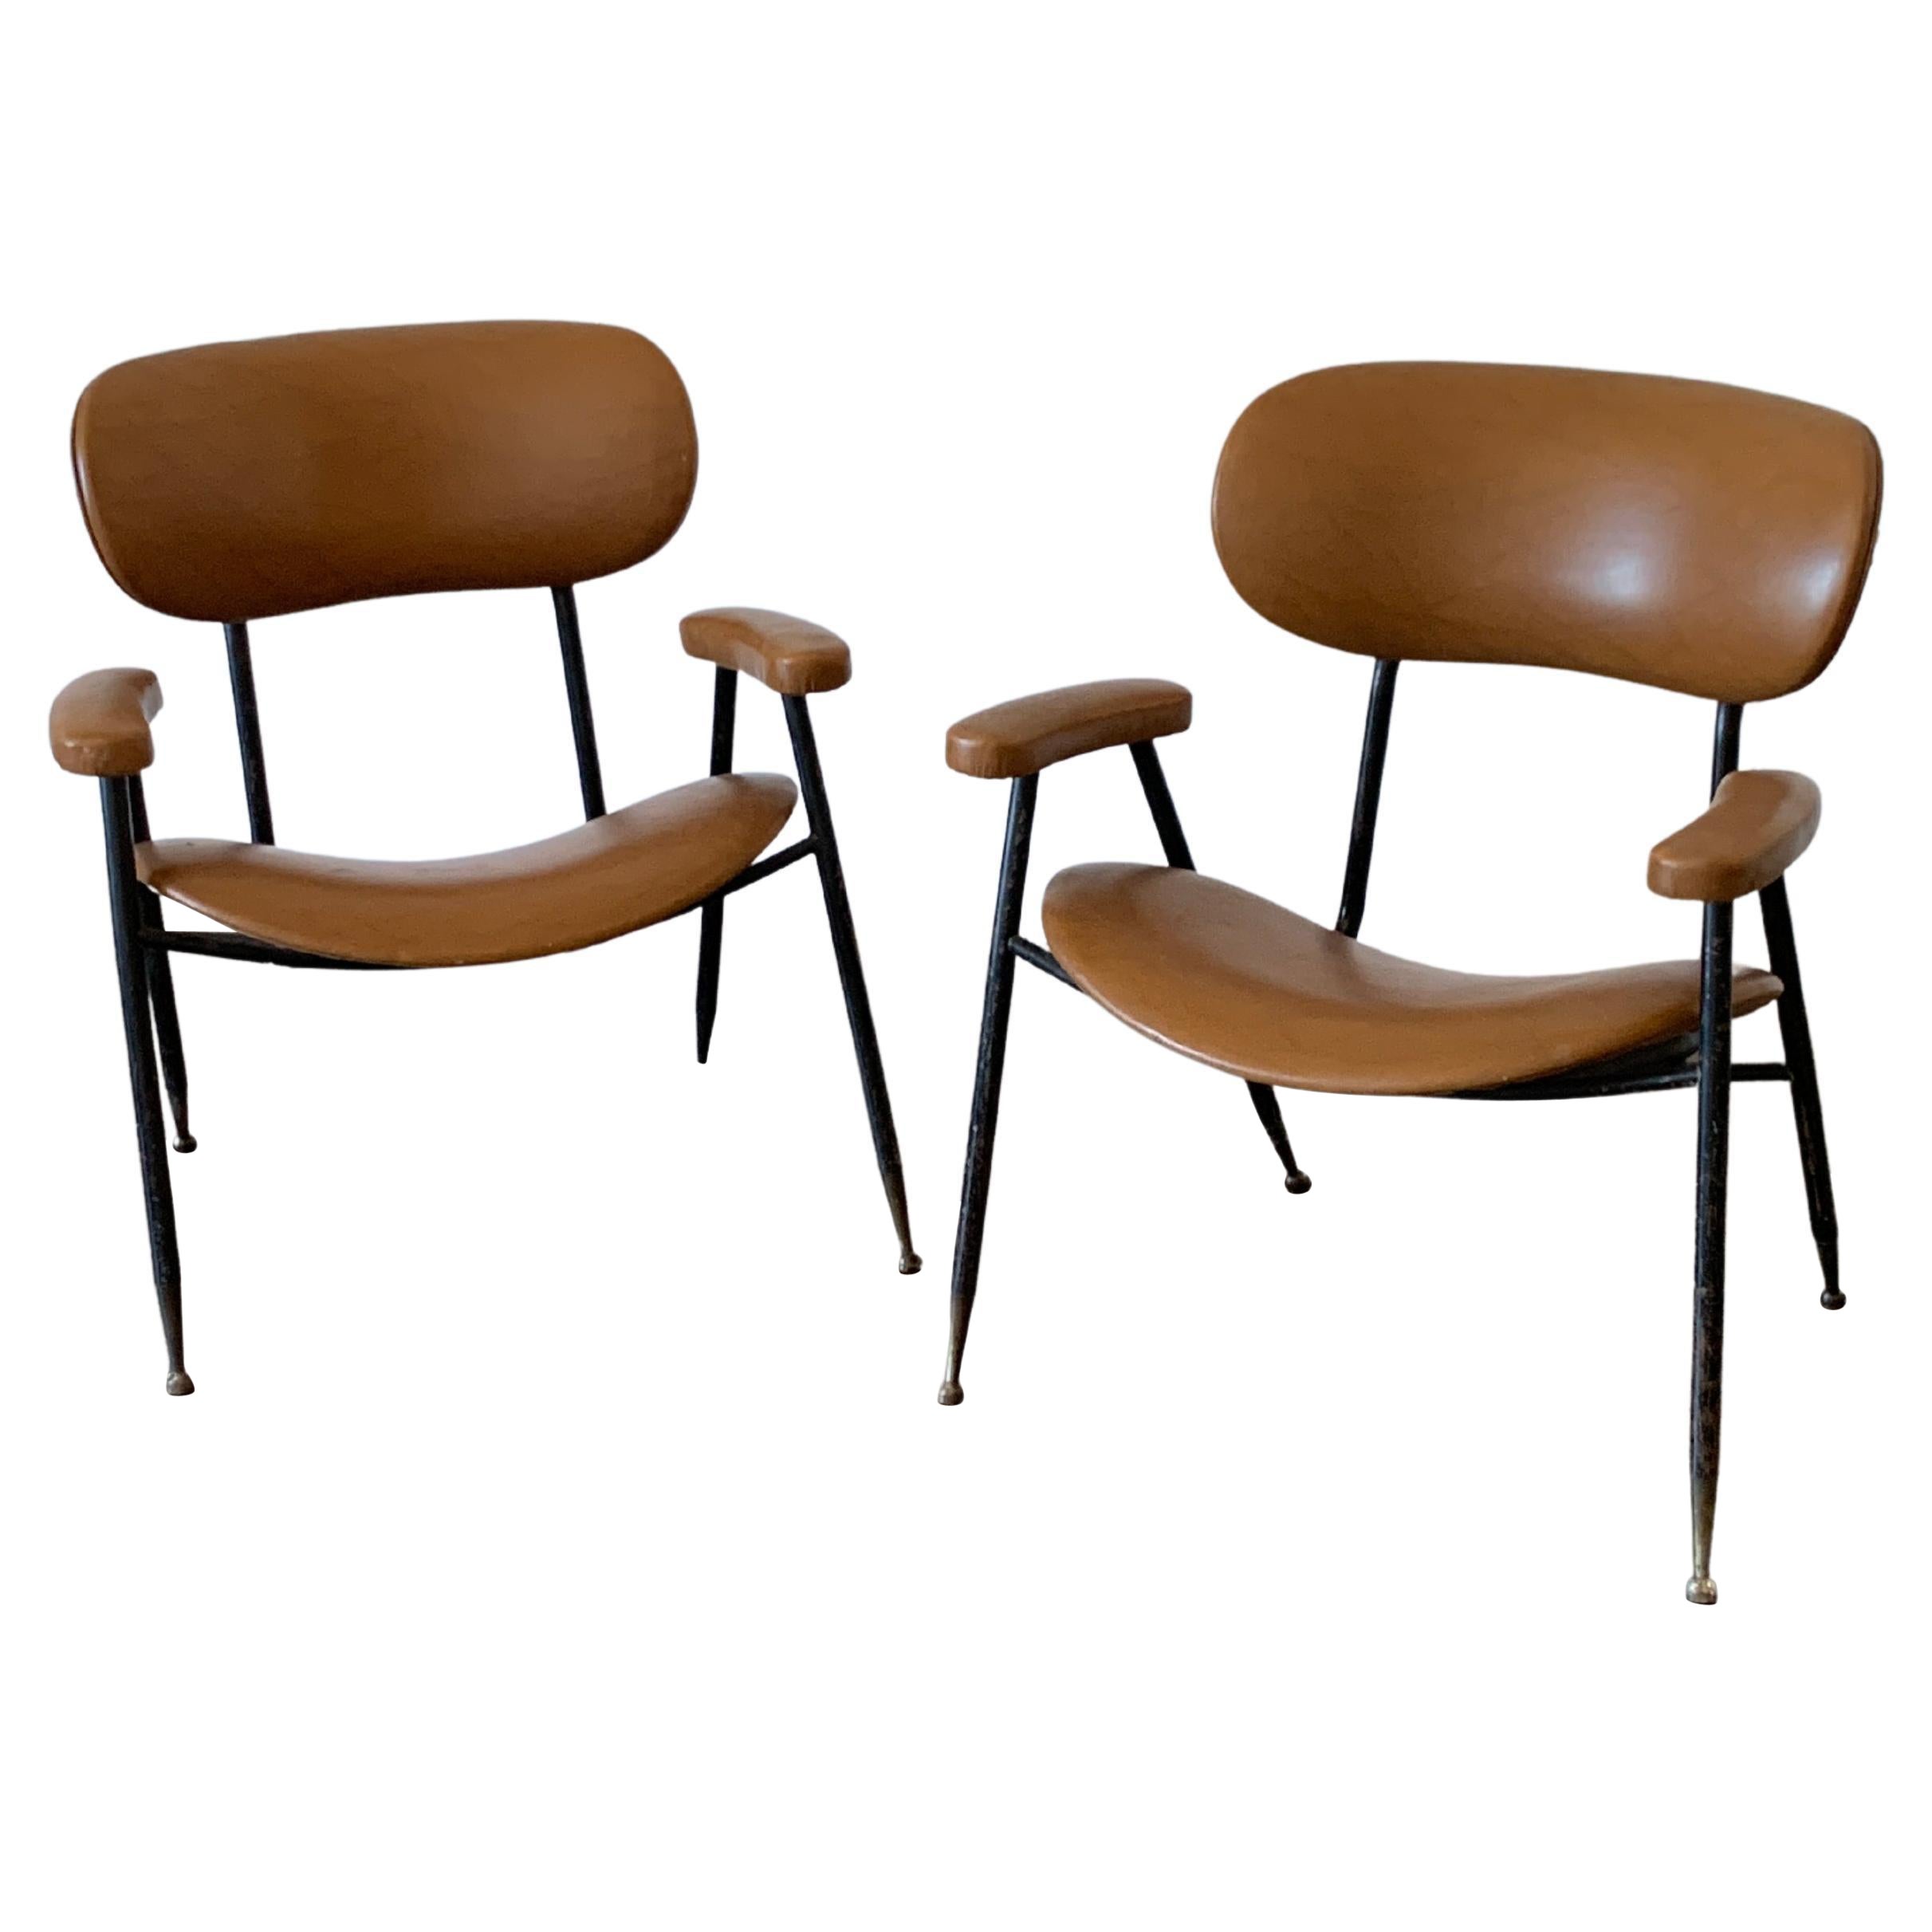 Two Italian Faux Leather Chairs by Gastone Rinaldi for RIMA 1960s  For Sale